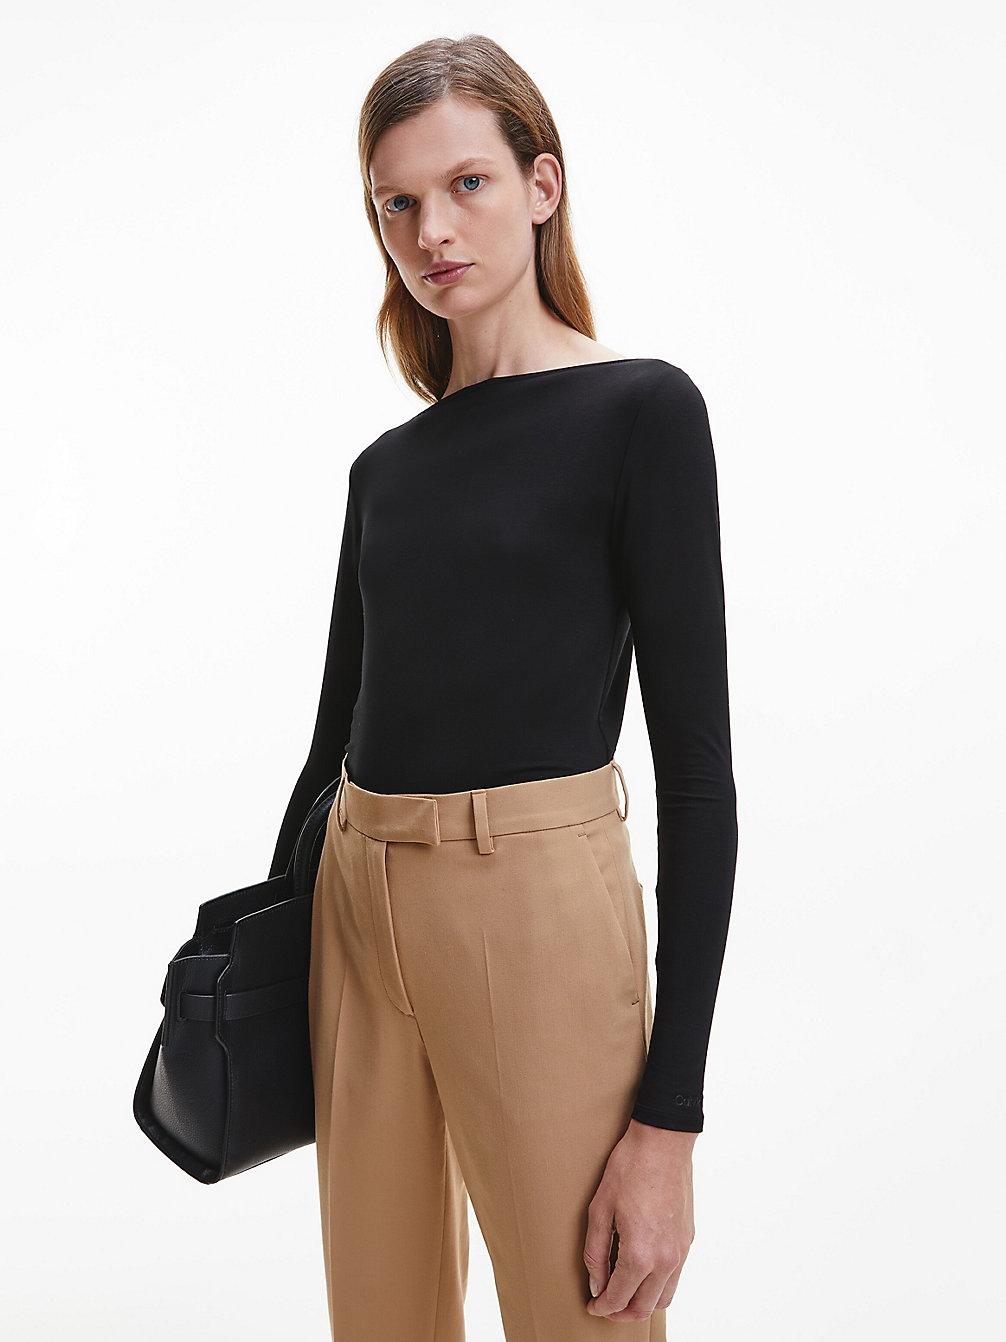 CK BLACK Top Skinny In Jersey Di Lyocell undefined donna Calvin Klein